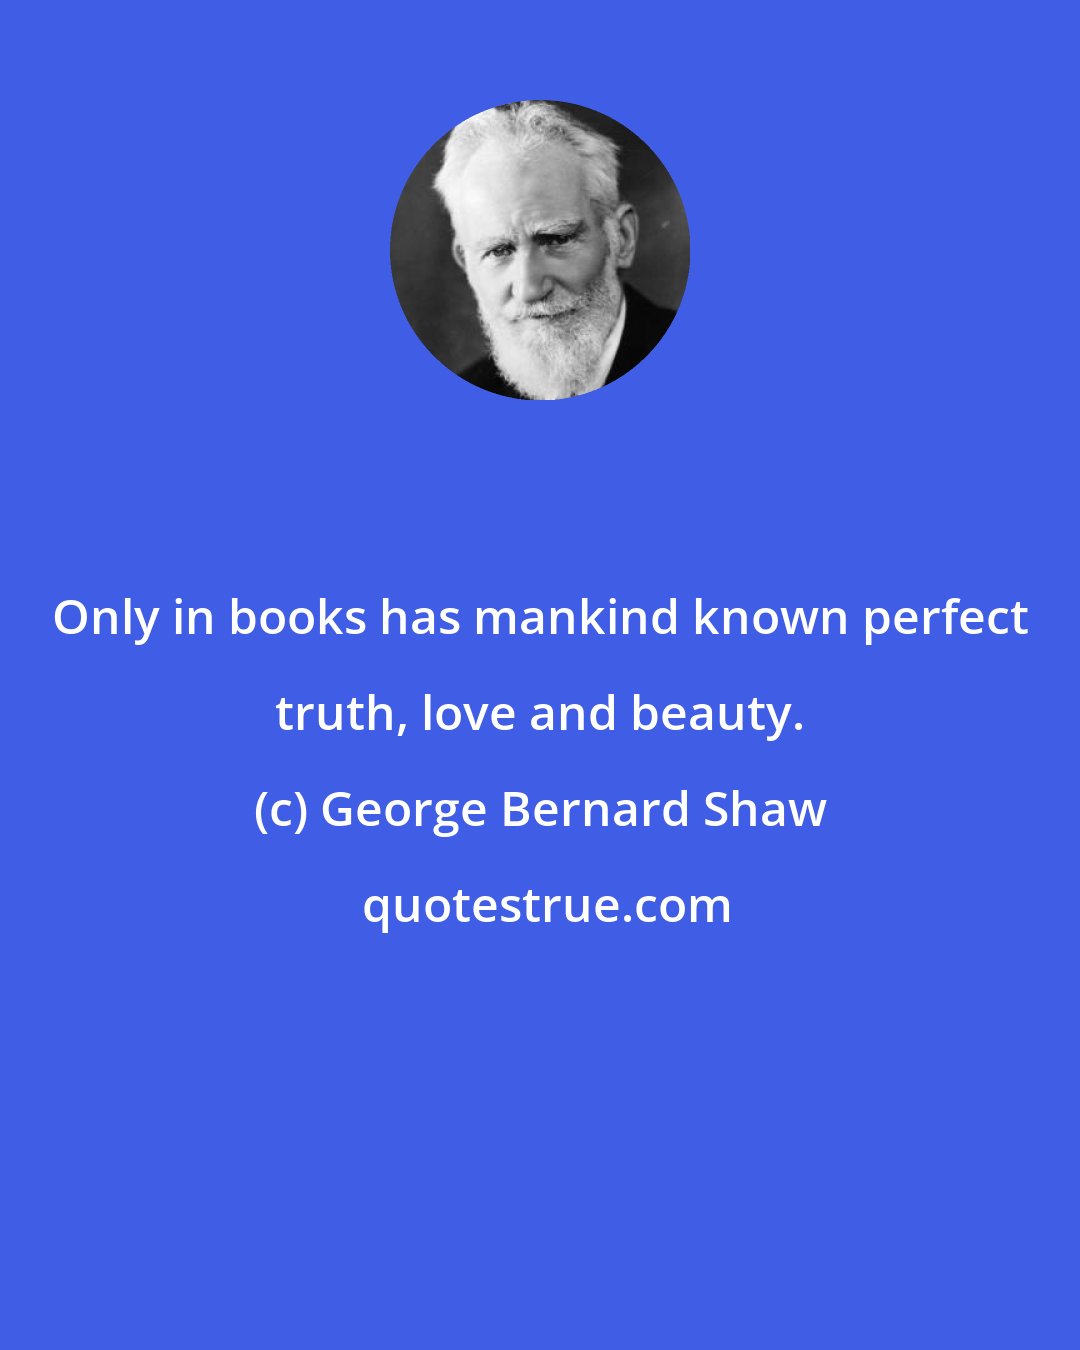 George Bernard Shaw: Only in books has mankind known perfect truth, love and beauty.